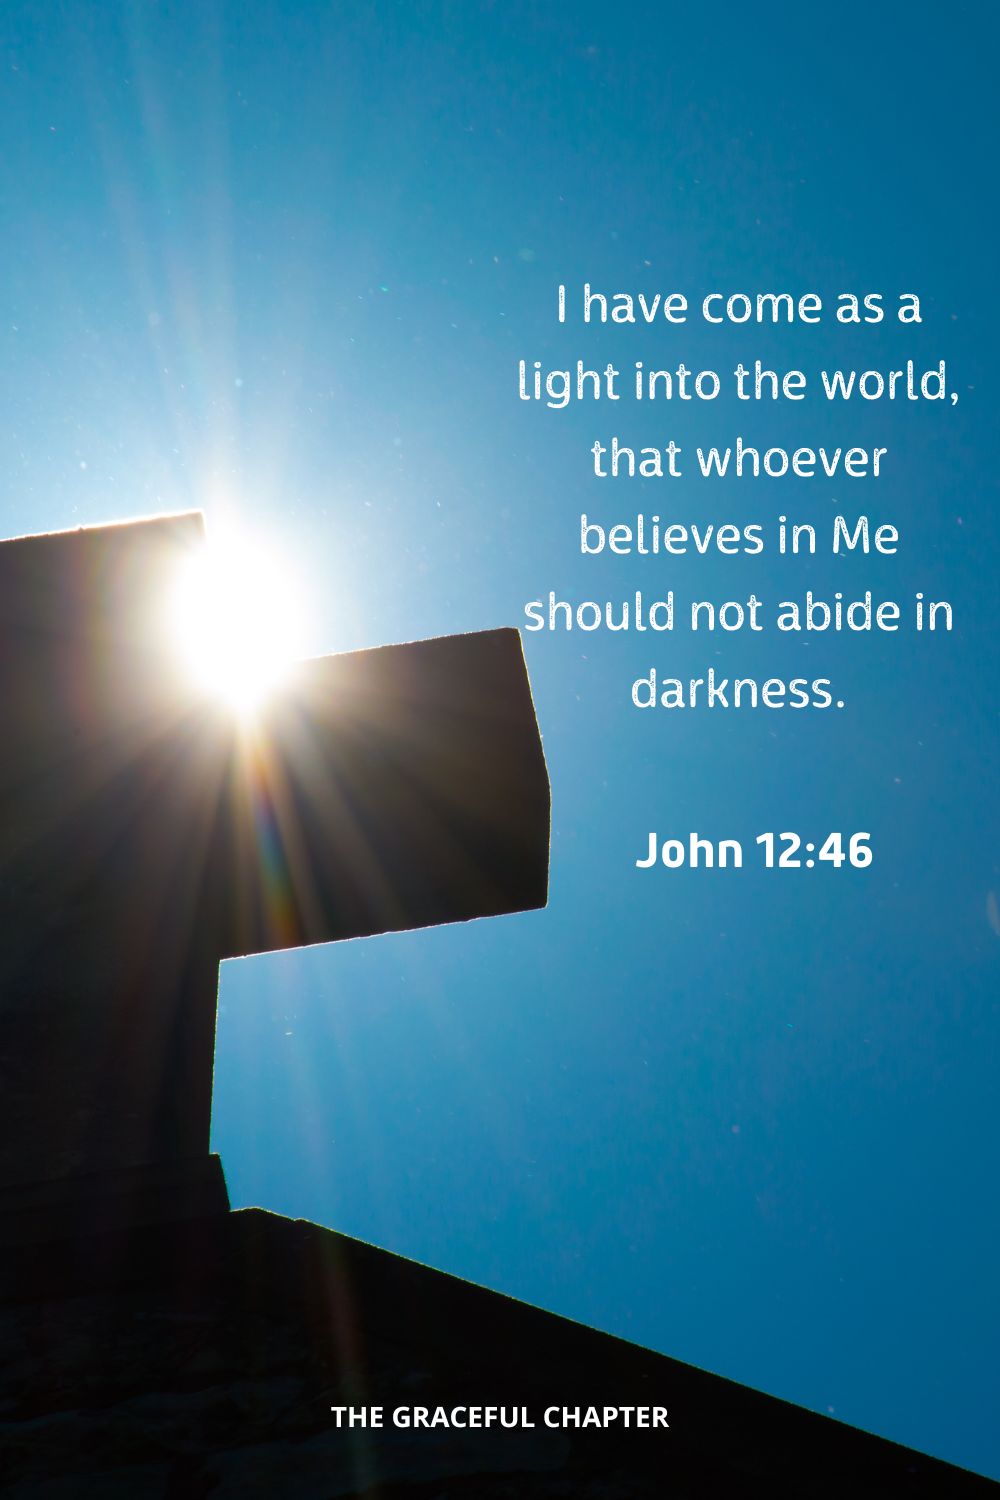 I have come as a light into the world, that whoever believes in Me should not abide in darkness.